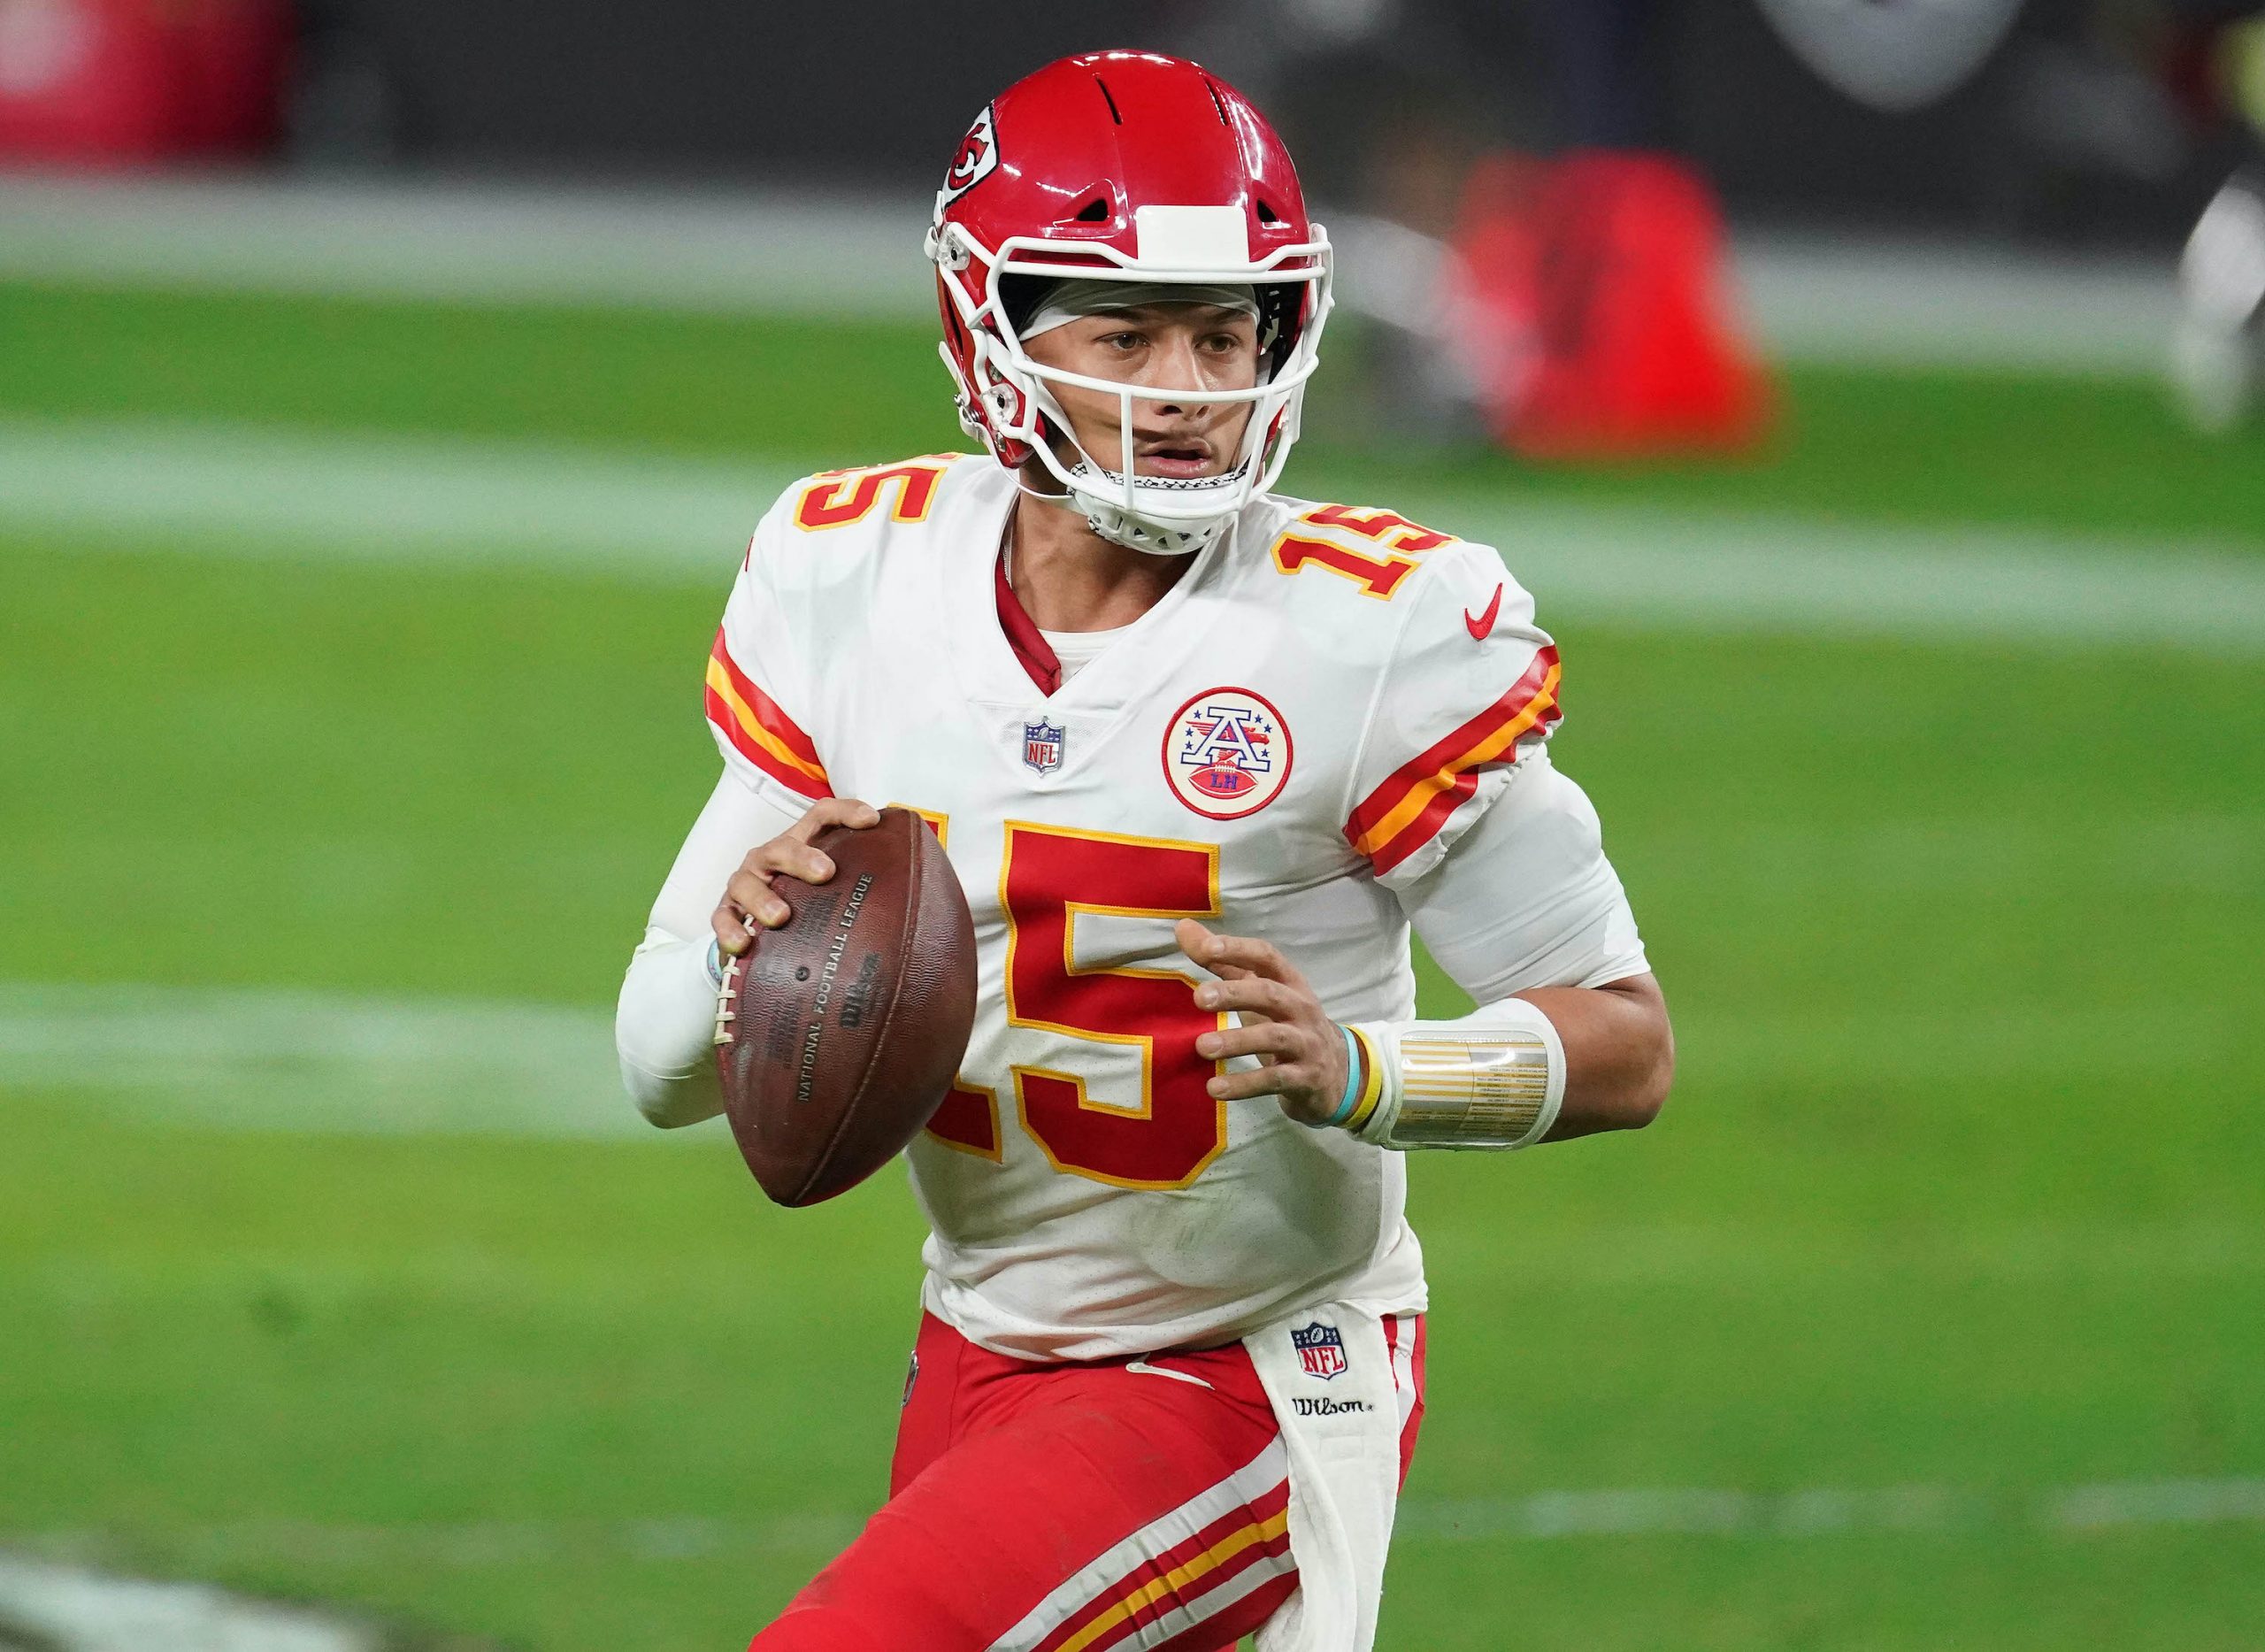 Patrick Mahomes is now odds-on to be named NFL Regular Season MVP.